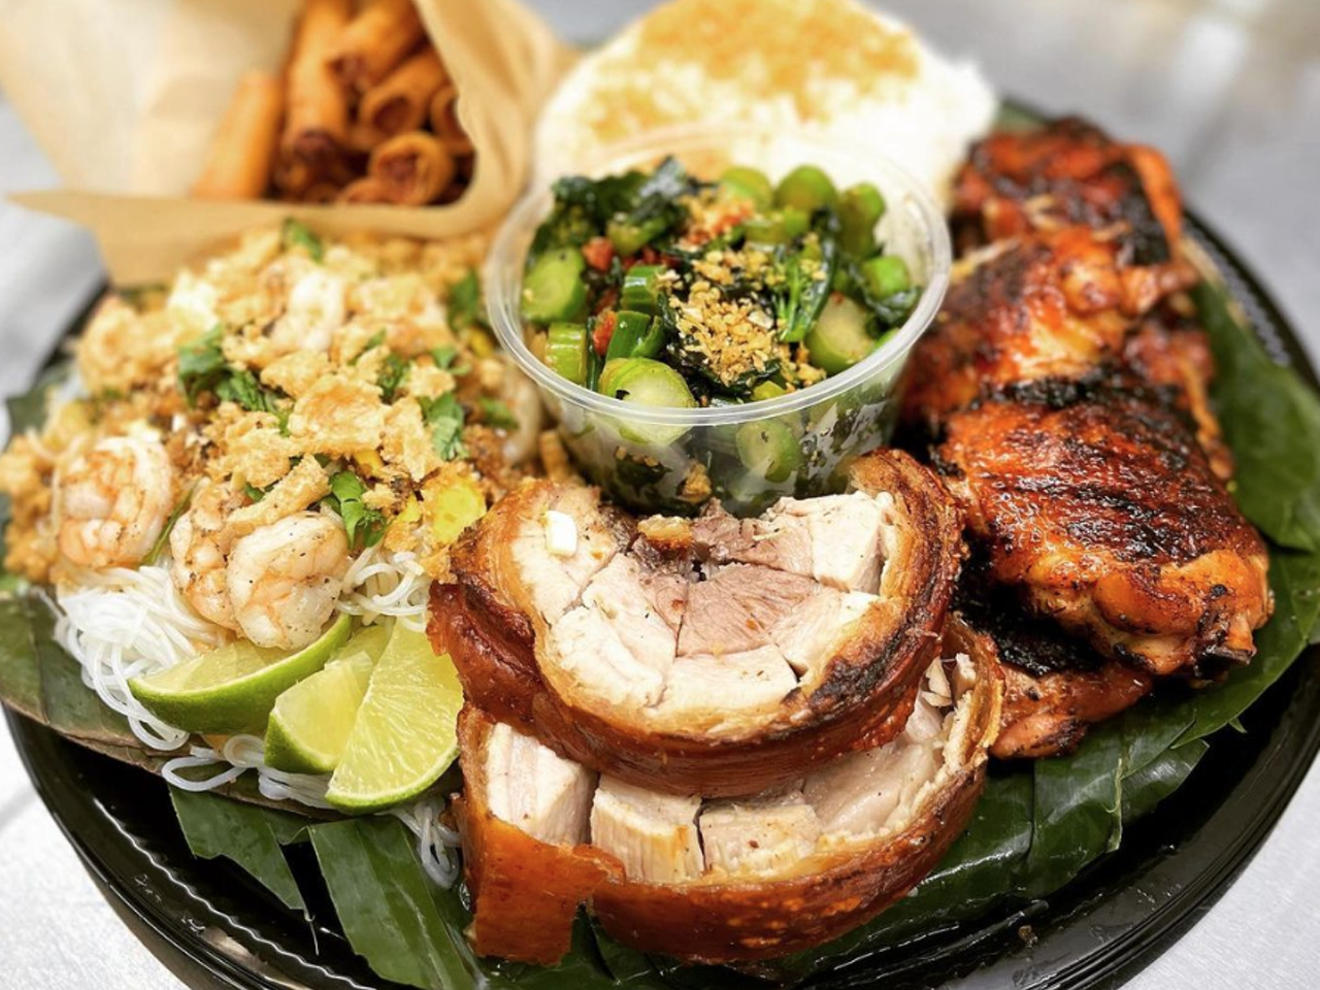 Jeepney Guy's Kamayan Platter offers a taste of the Philippines cooked by chef Dennis Villafranca.